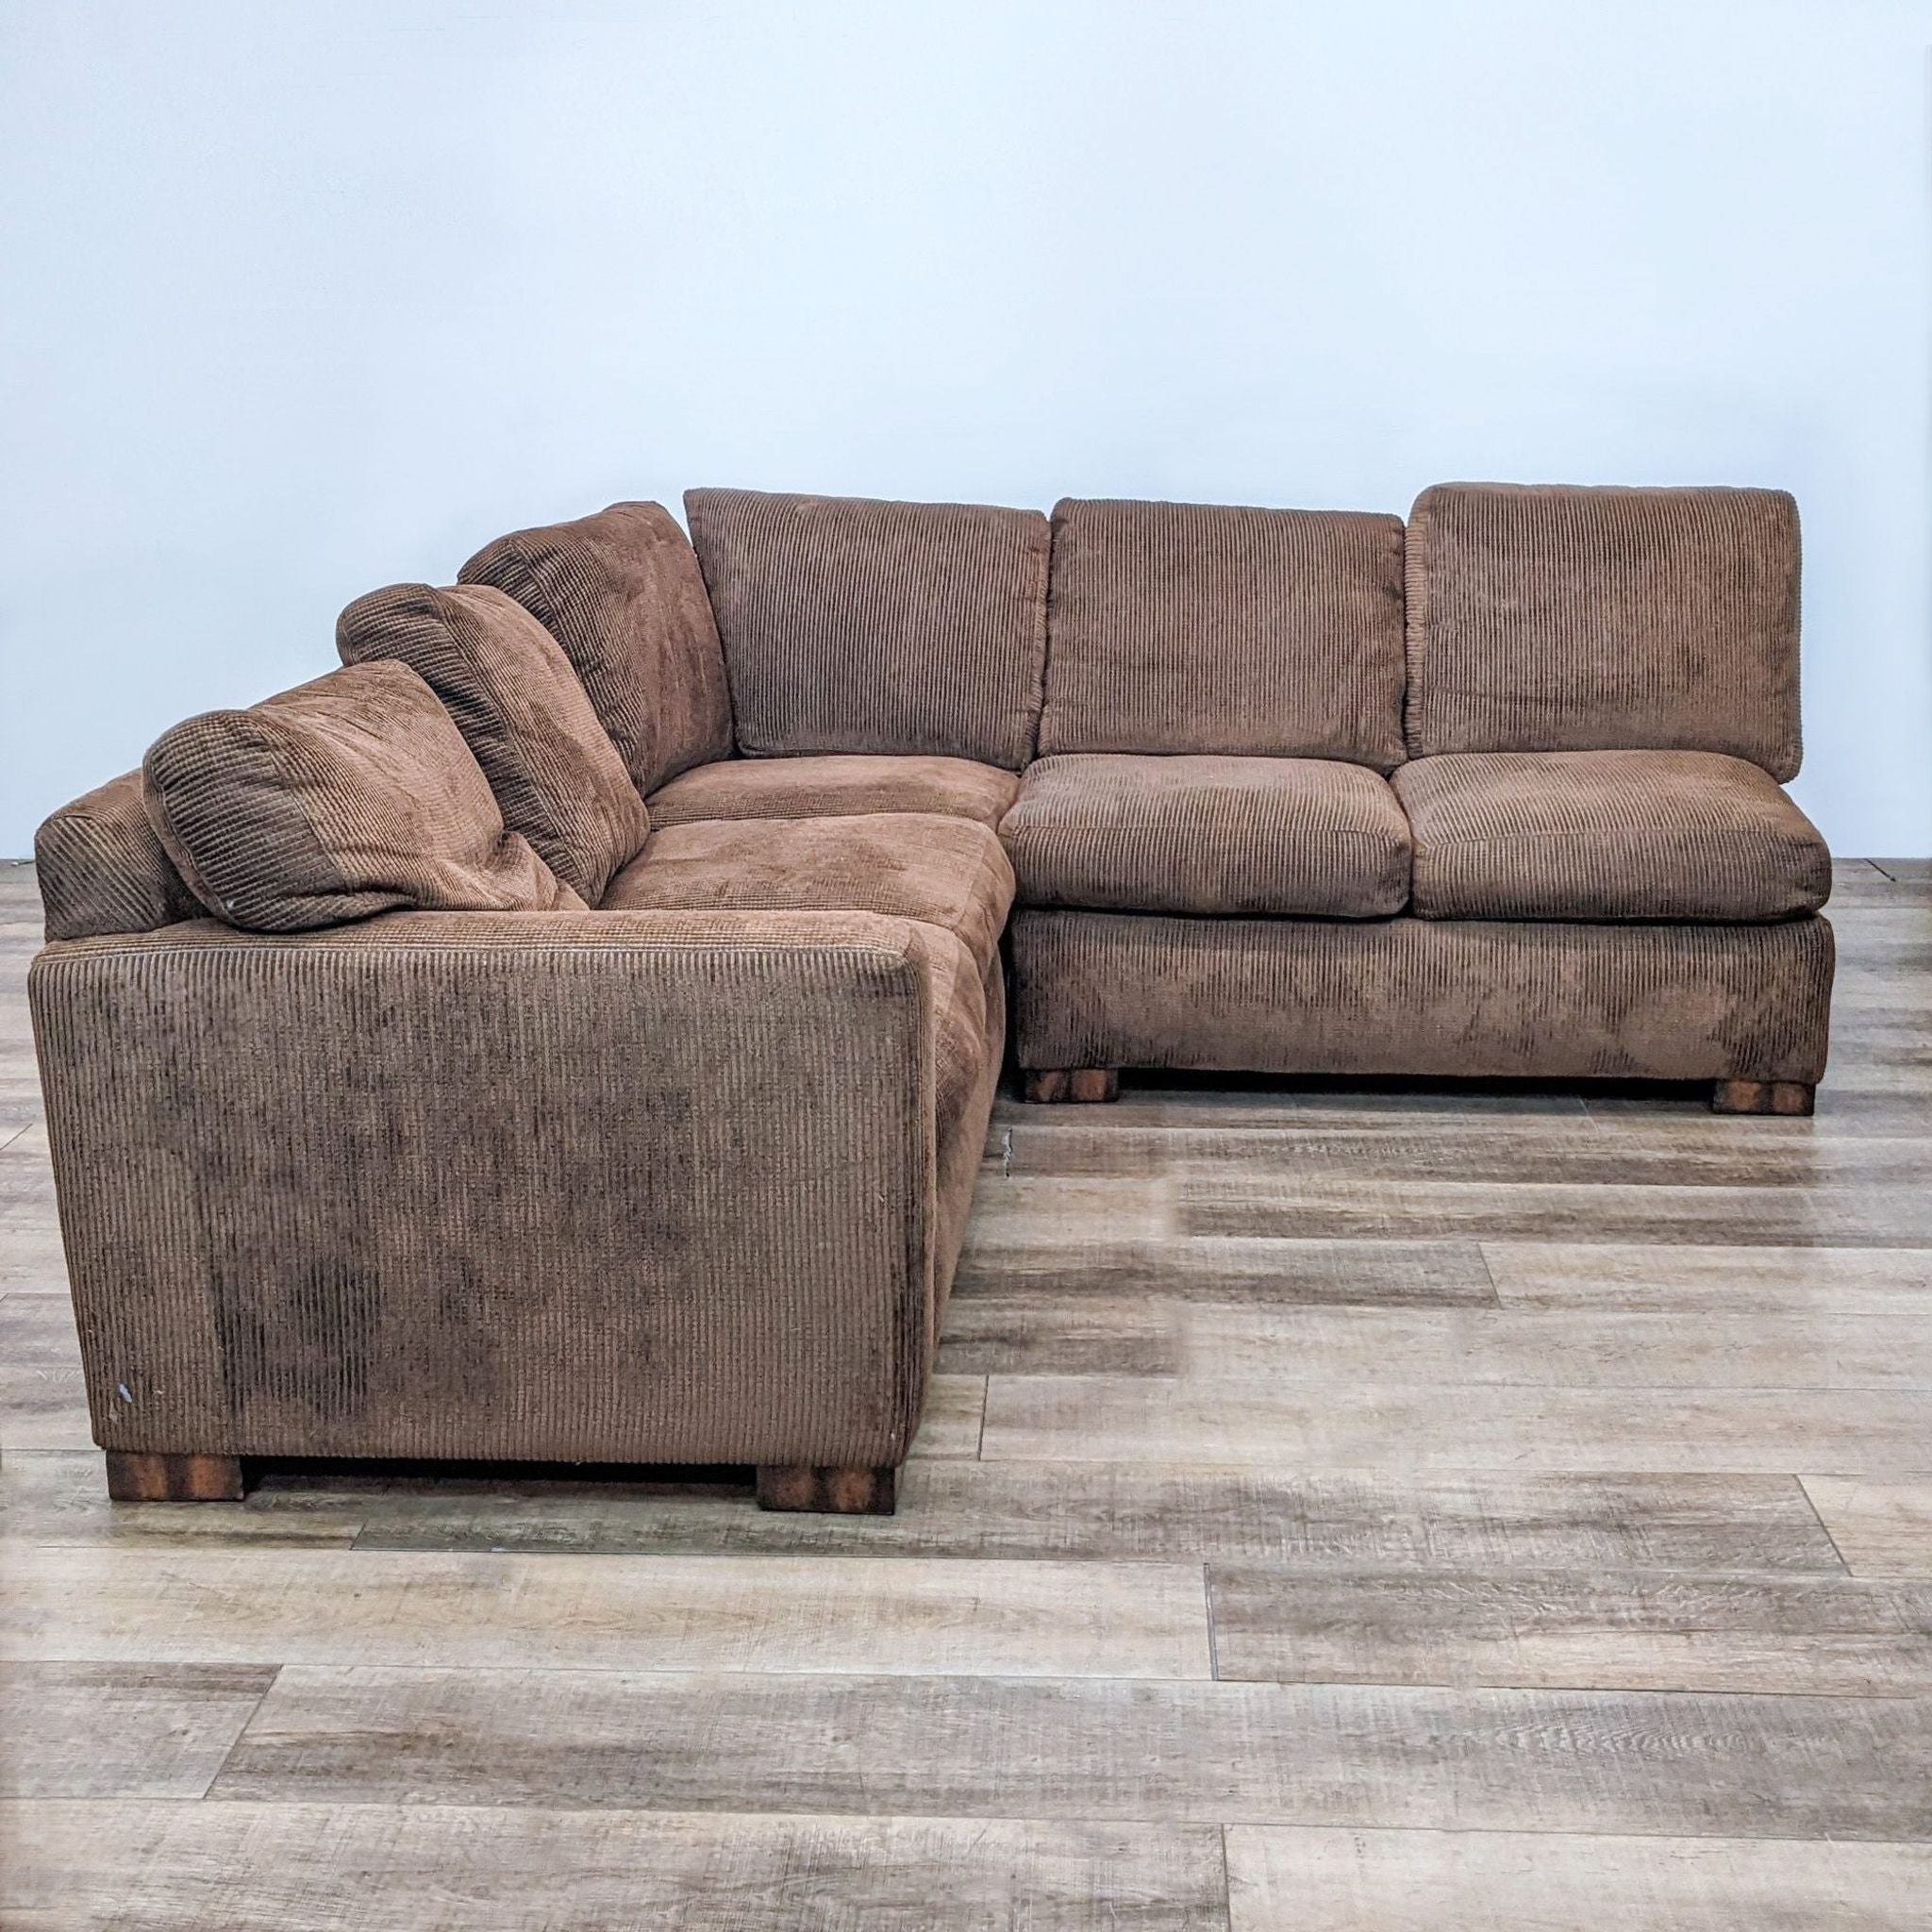 Flexsteel brown two-piece sectional with plush cushions and wooden block feet, shown in a well-lit room with wooden flooring.